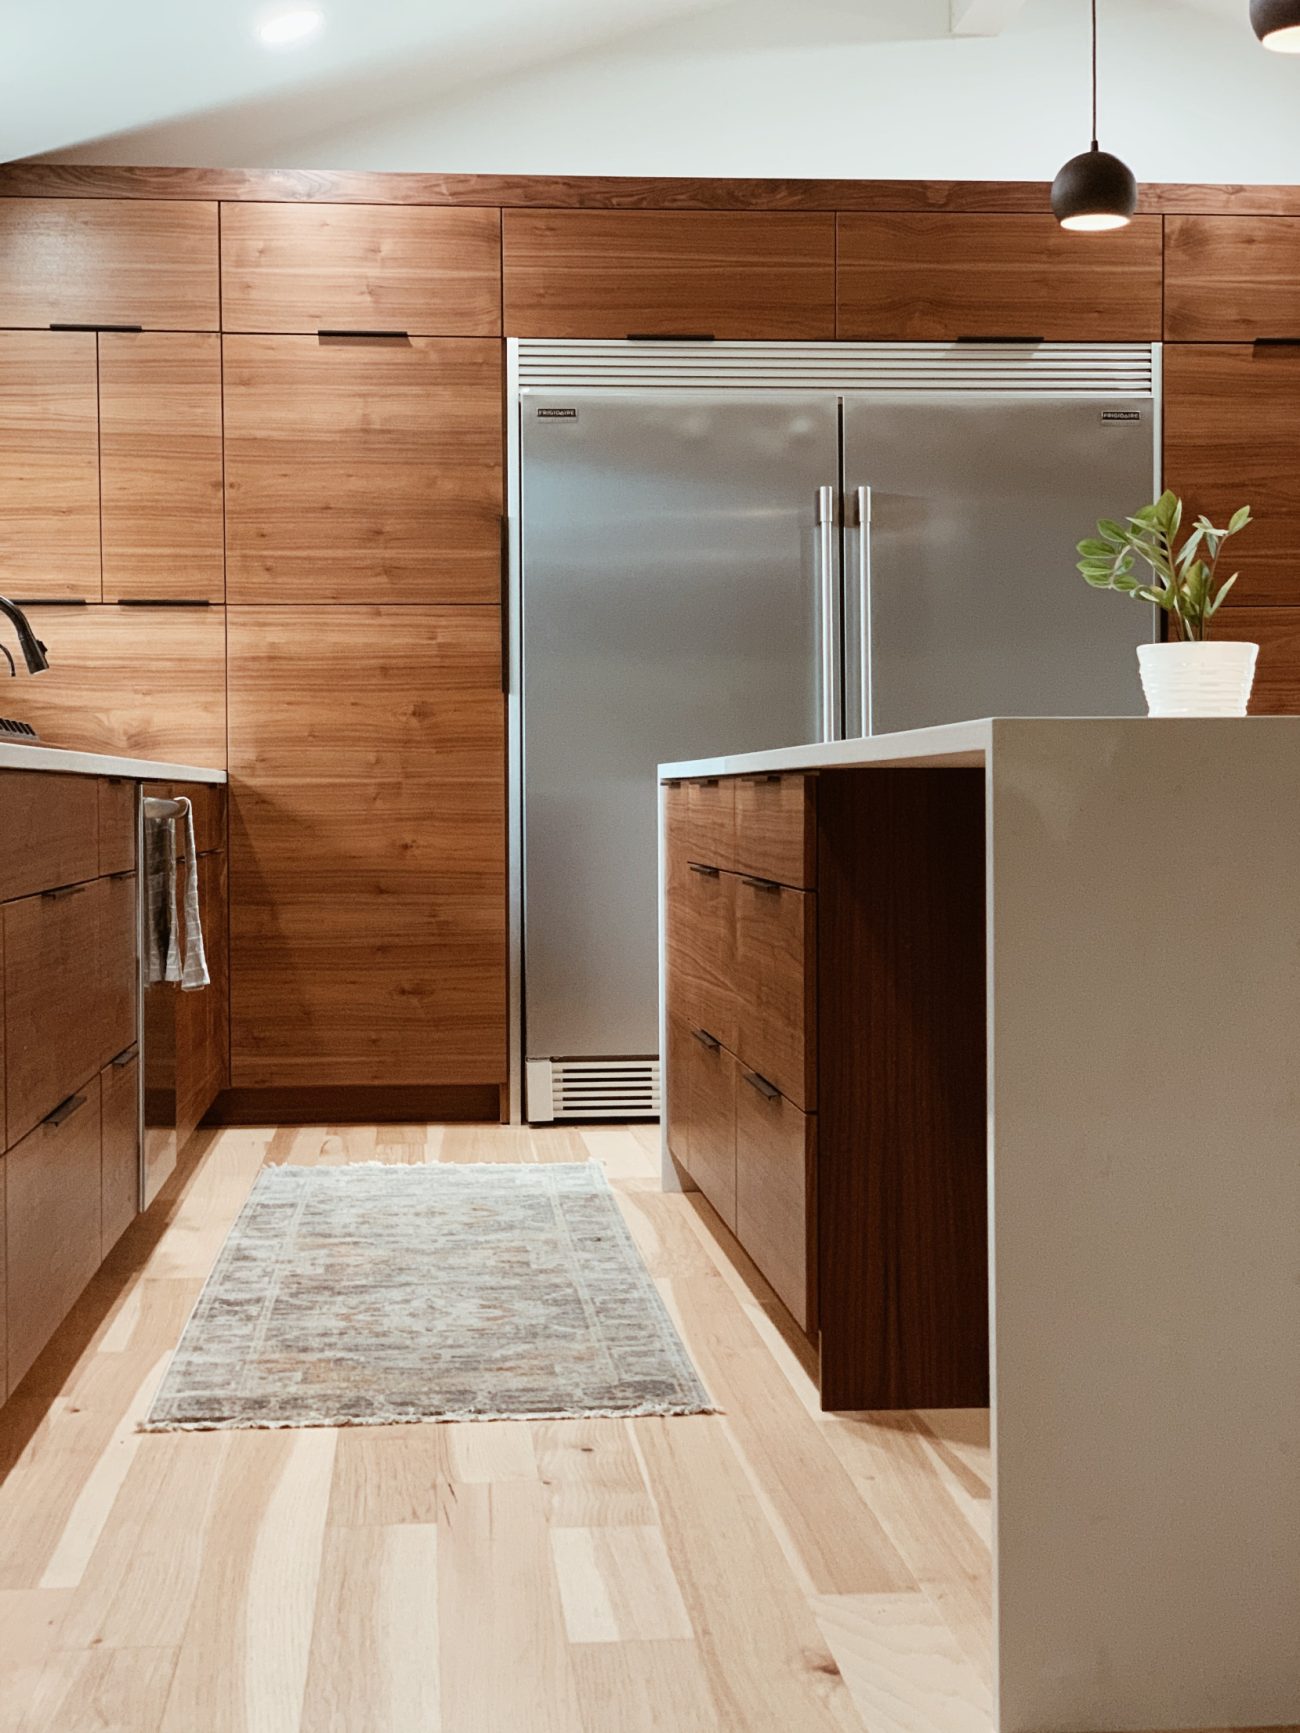 Extra-large refrigerator in a kitchen with wooden cabinets